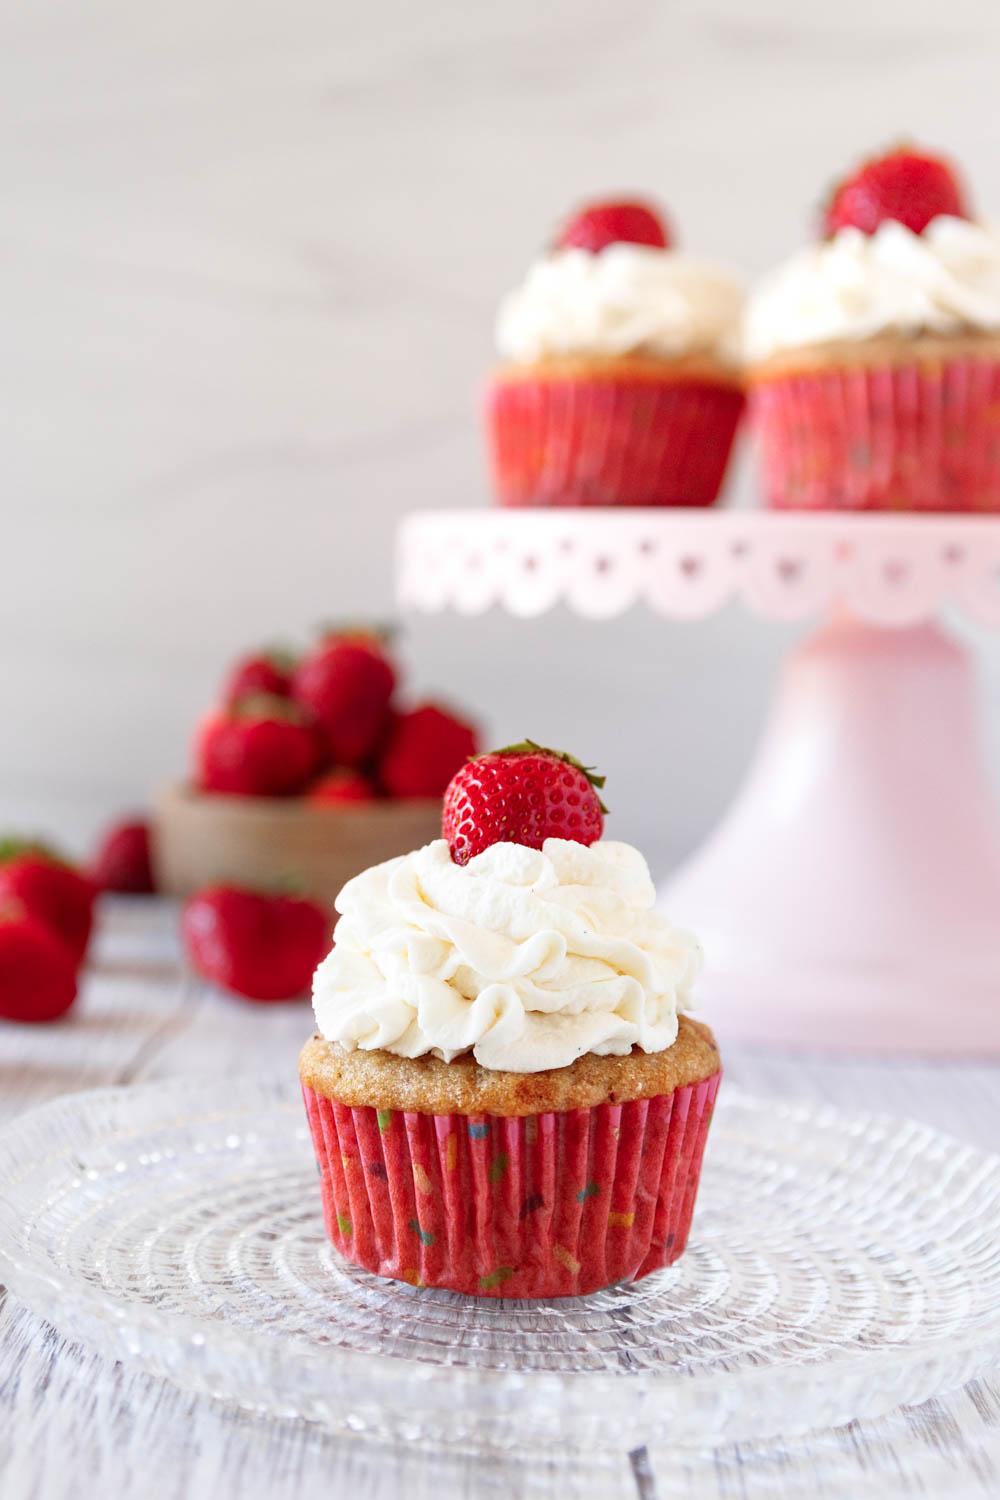 decorated strawberries and cream cupcake piled high with stabilized whipped cream frosting and topped with a small fresh strawberry. In the background there's a pink cake plate with more strawberries and a small wooden bowl of fresh strawberries